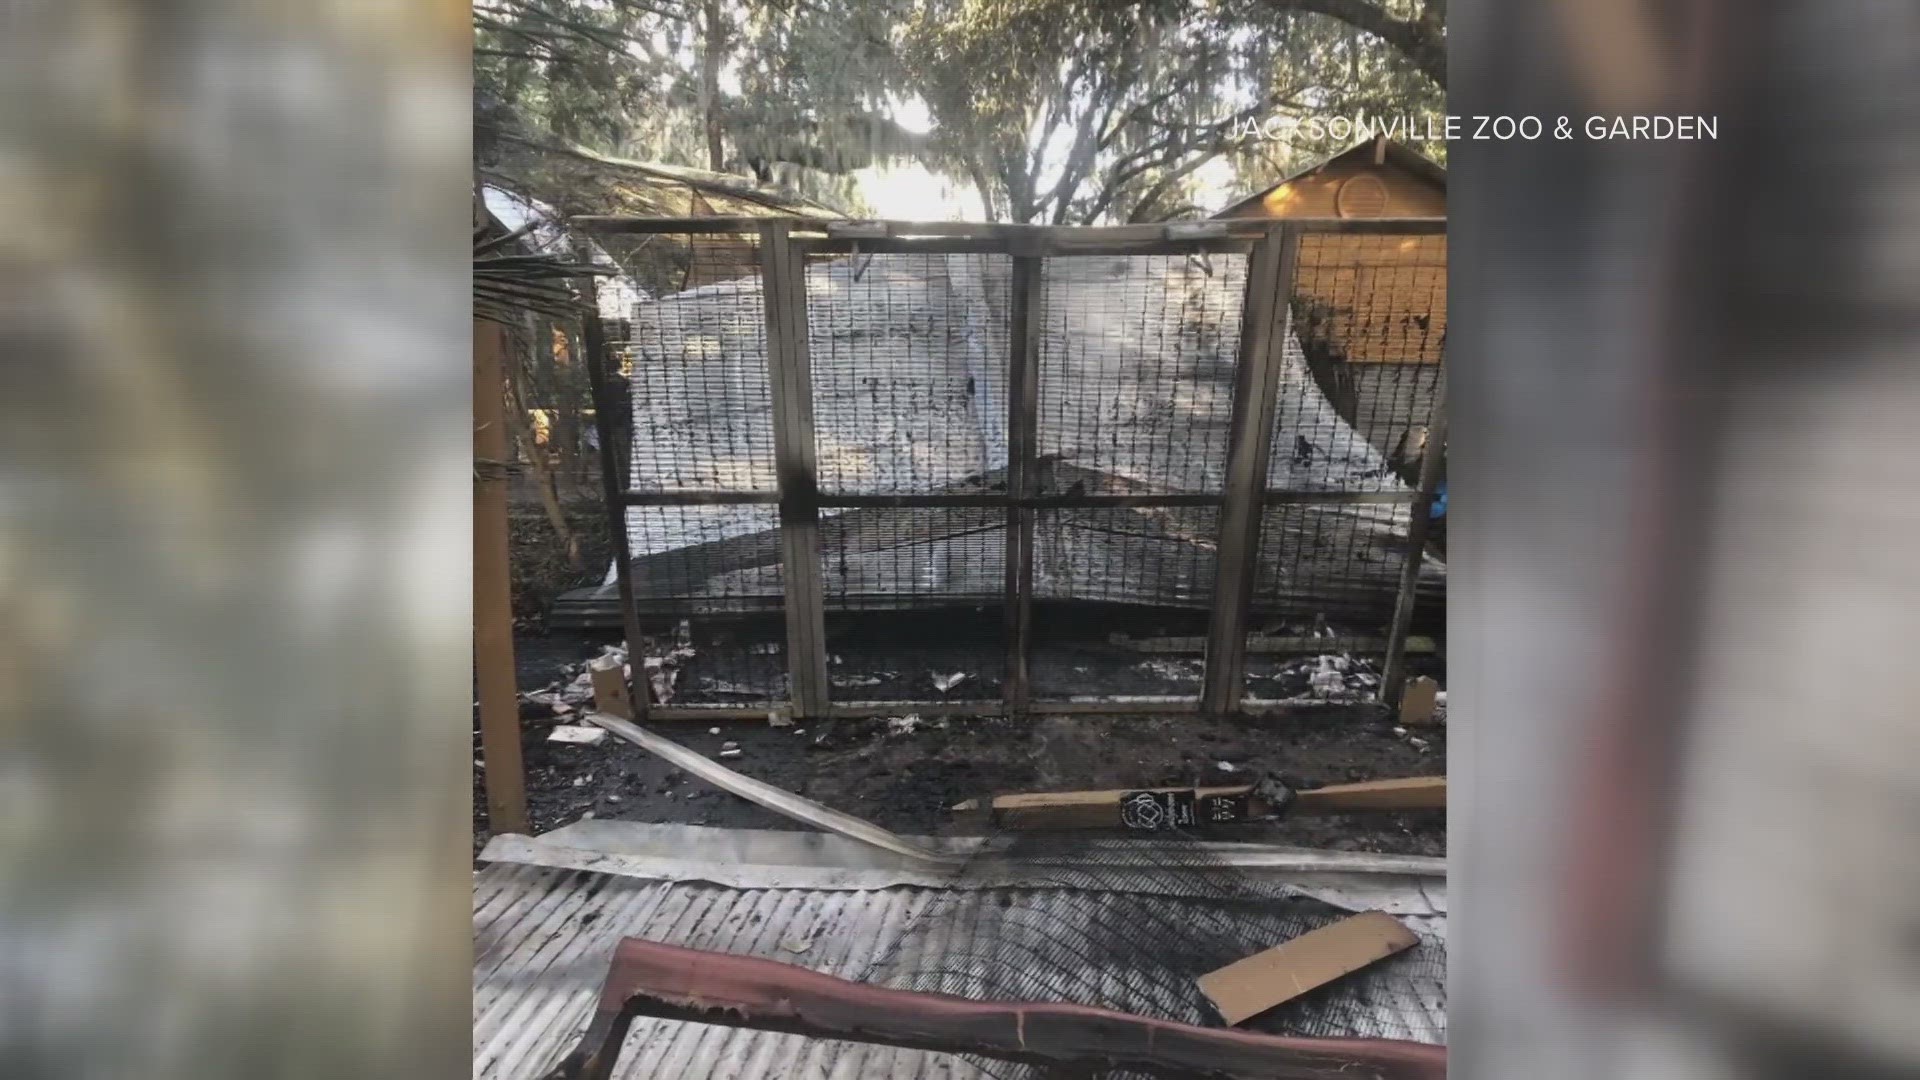 Despite the overnight fire in December, no birds were injured. But the aviary was shut down for more than two months as crews rebuilt.